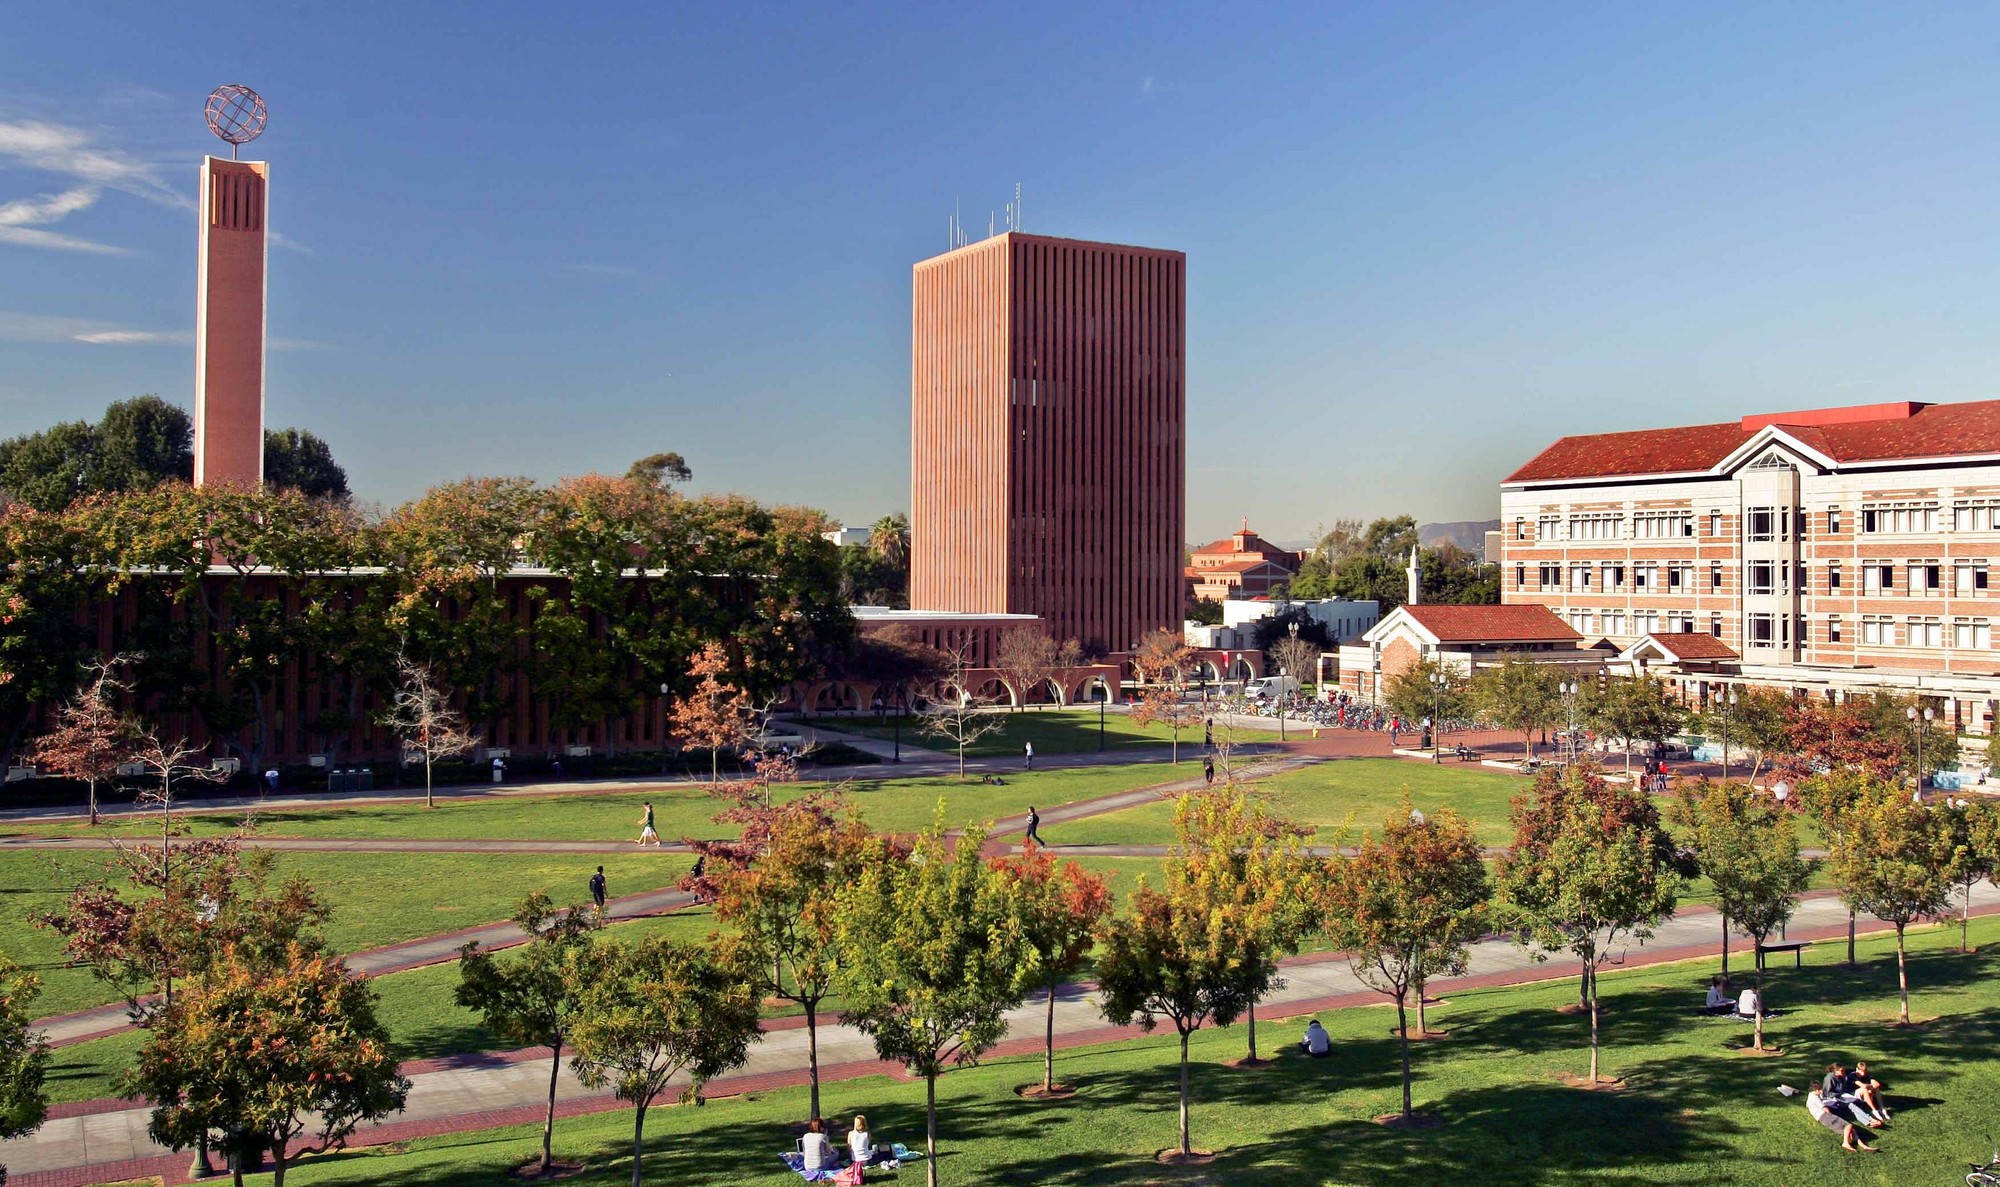 A view of USC's Rossier School of Education buildings with the grass quad in the foreground